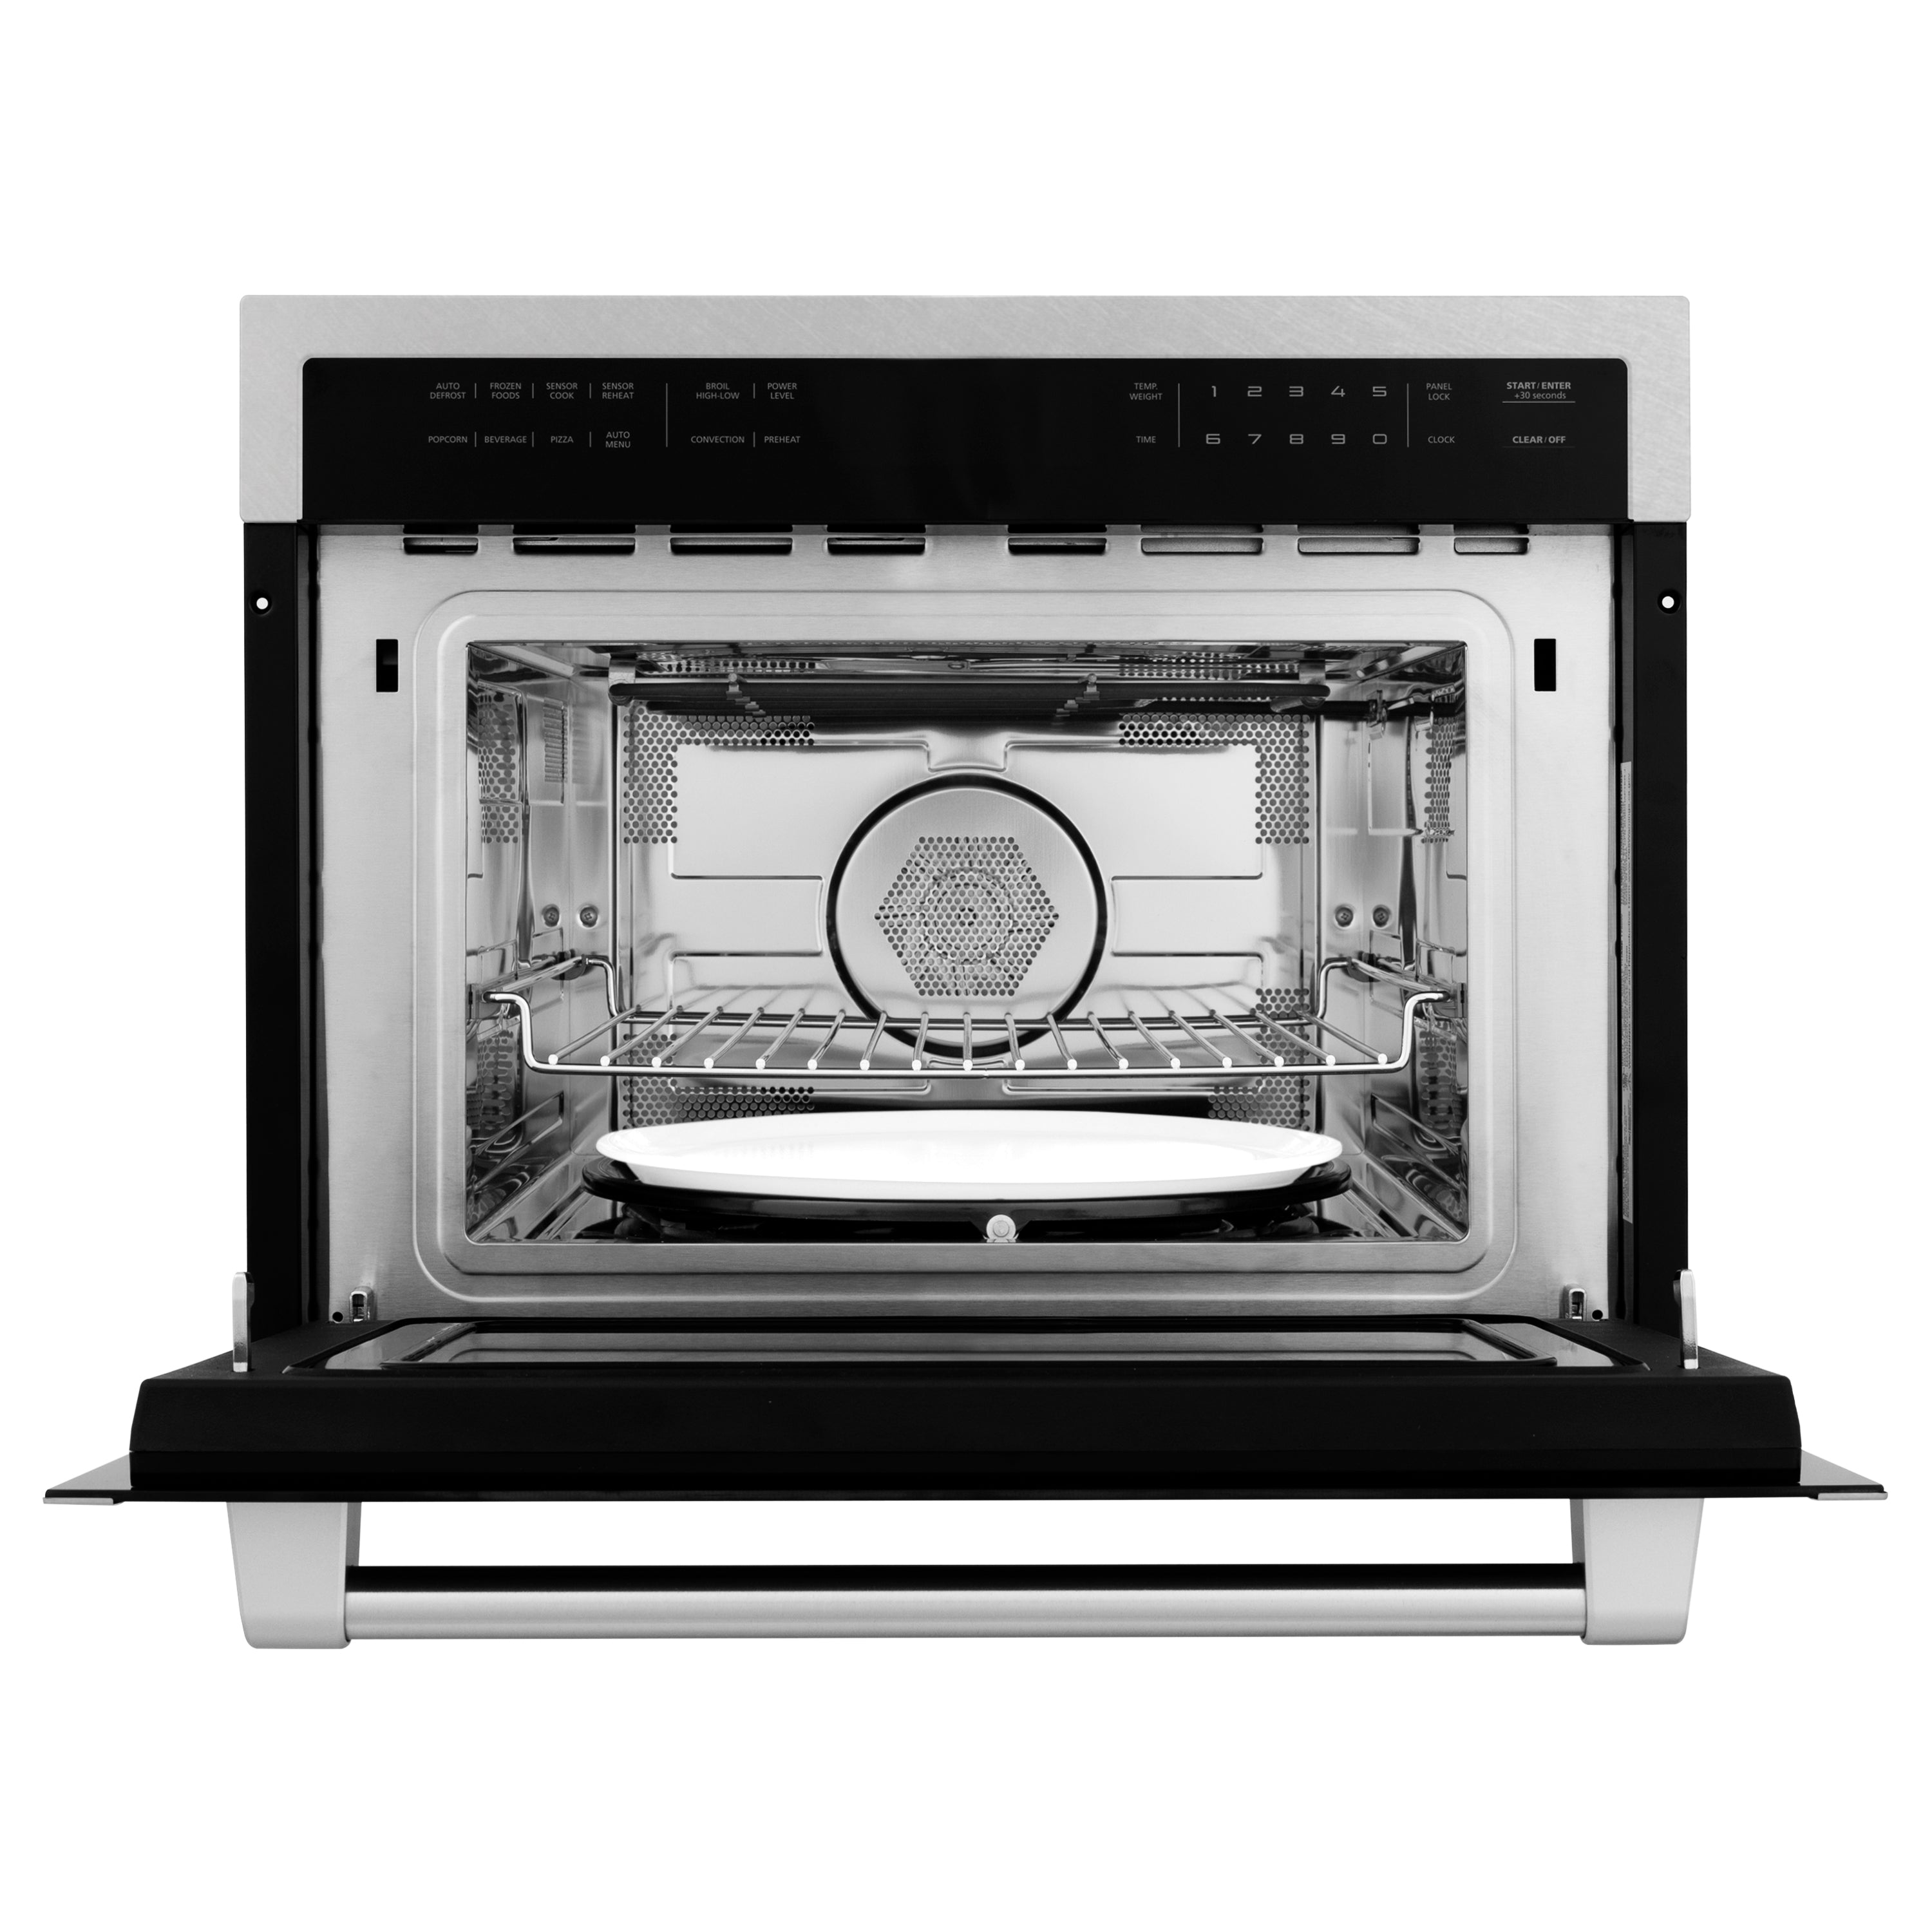 ZLINE 24" 1.6 cu ft. Built-in Convection Microwave Oven in Fingerprint Resistant  with Speed and Sensor Cooking